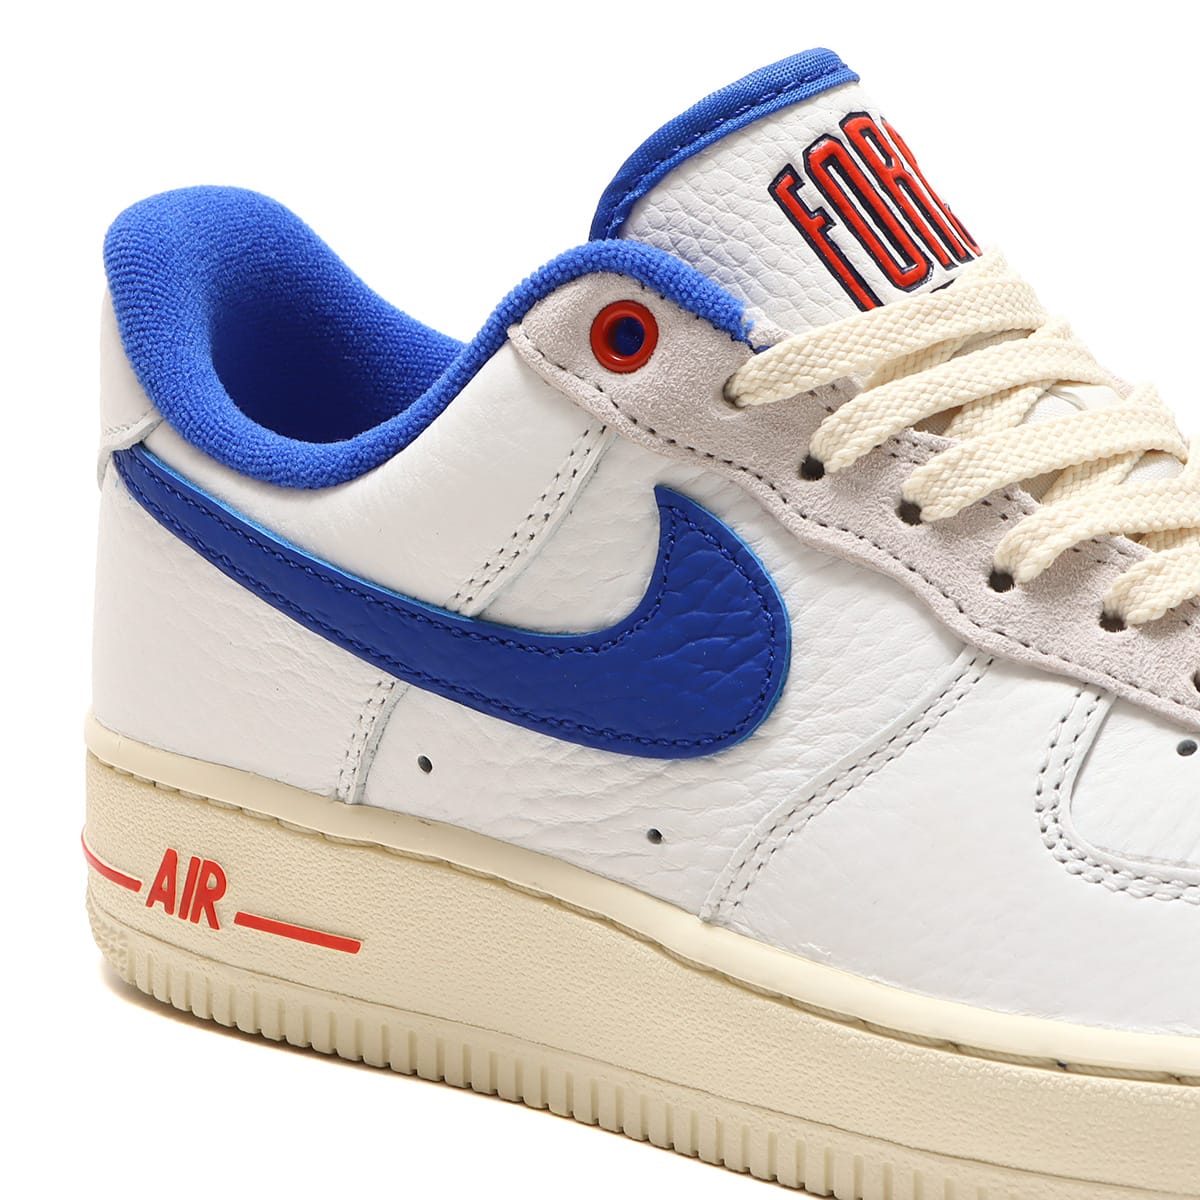 NIKE WMNS AIR FORCE 1 '07 LX SUMMIT WHITE/HYPER ROYAL-PICANTE RED ...